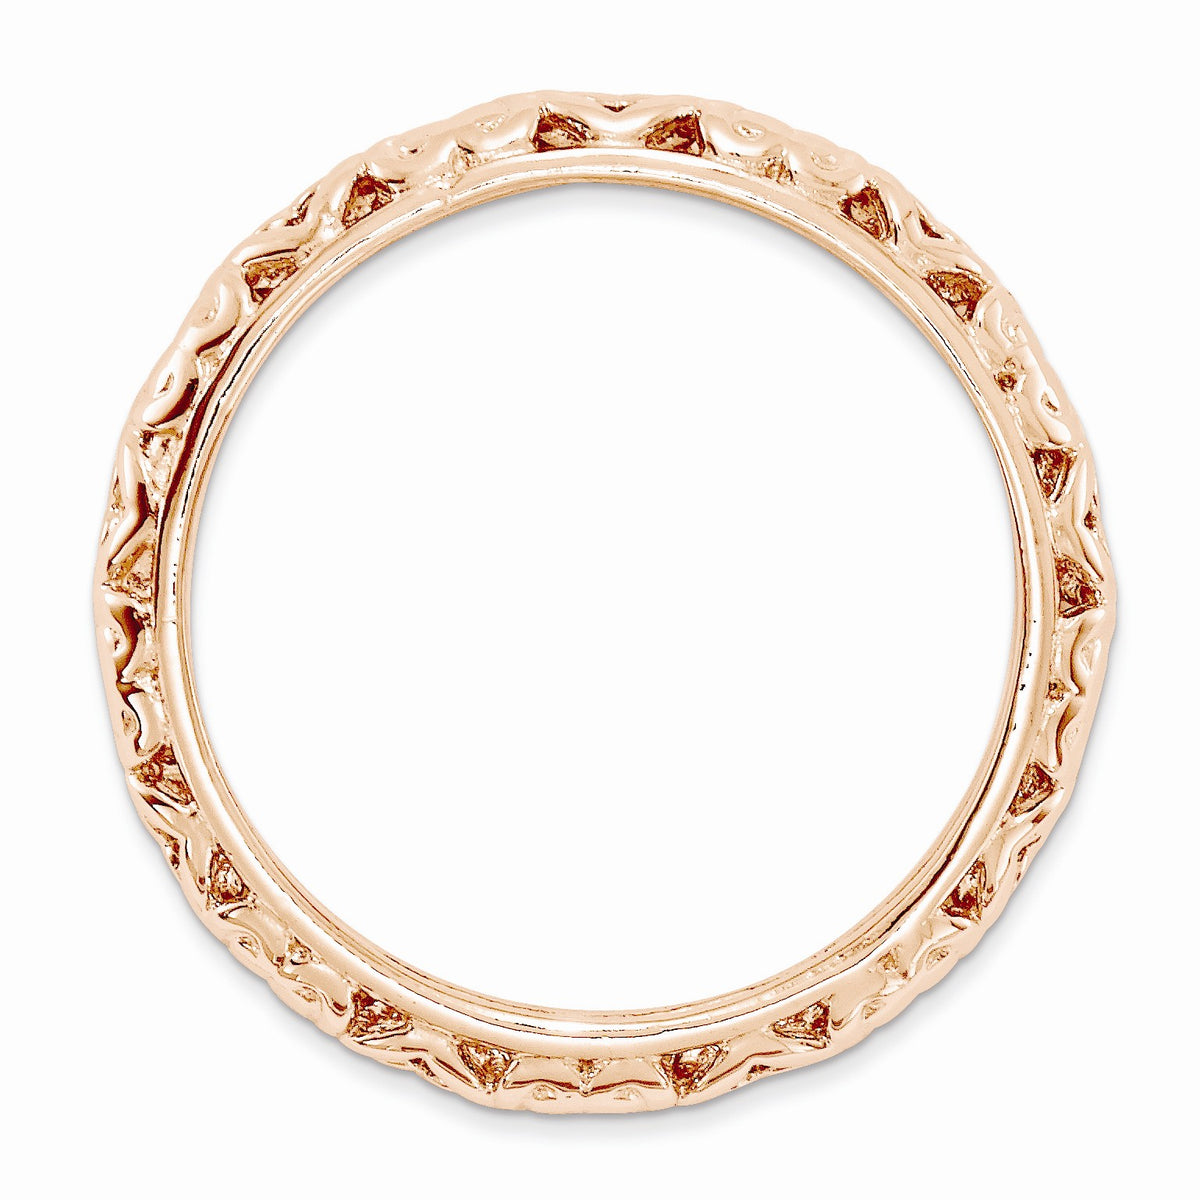 Alternate view of the 3.5mm Rose Gold Tone Sterling Silver Stackable Domed Carved Heart Band by The Black Bow Jewelry Co.